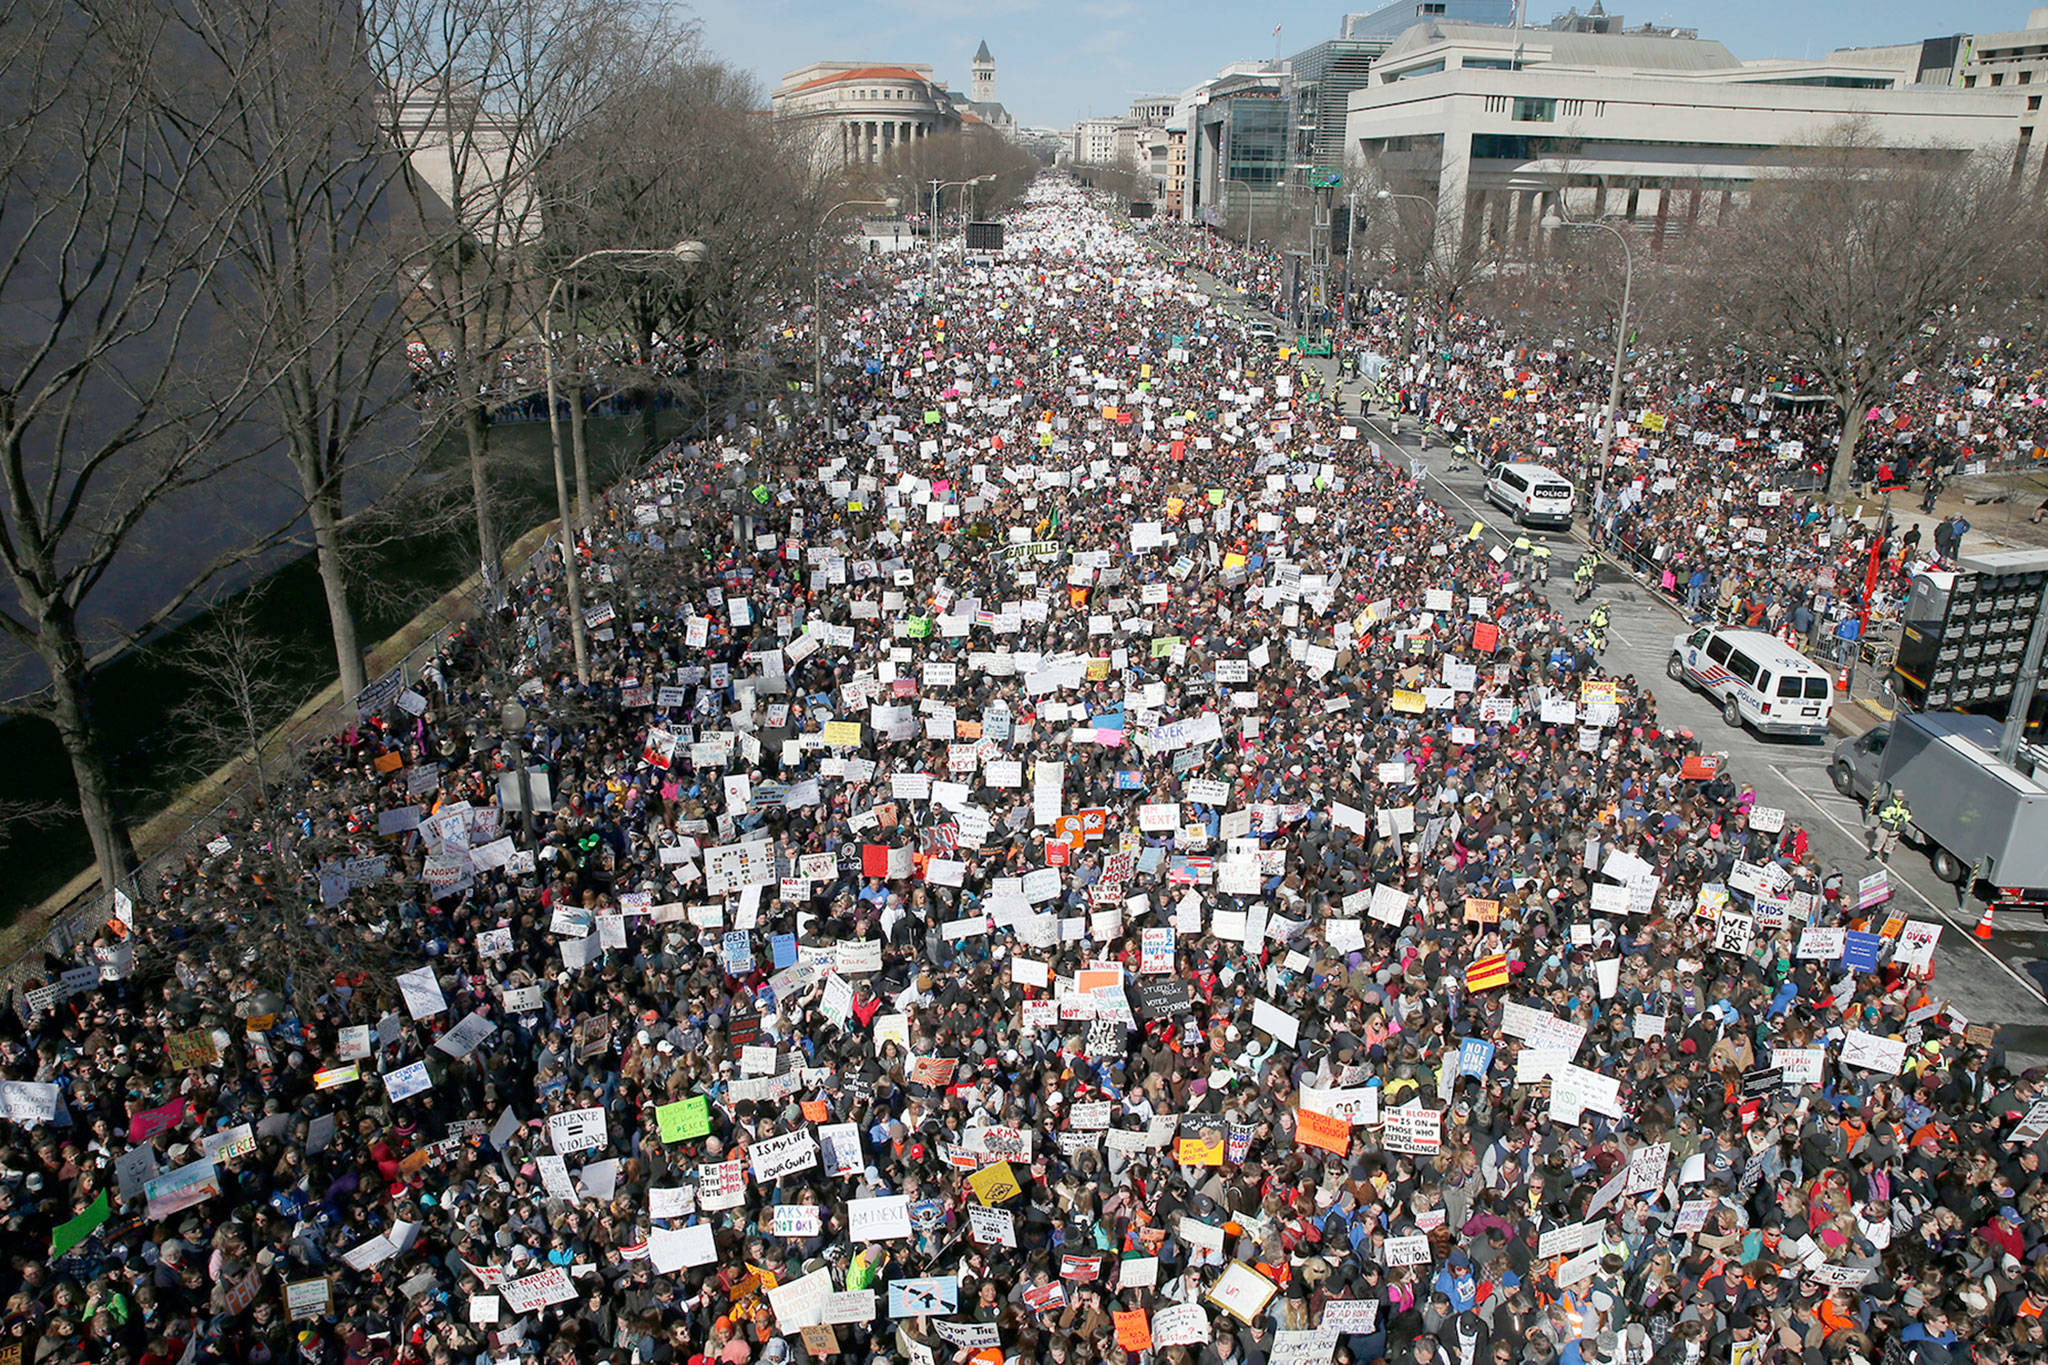 Looking west, people fill Pennsylvania Avenue during the March for Our Lives rally in support of gun control on Saturday in Washington. (AP Photo/Alex Brandon)